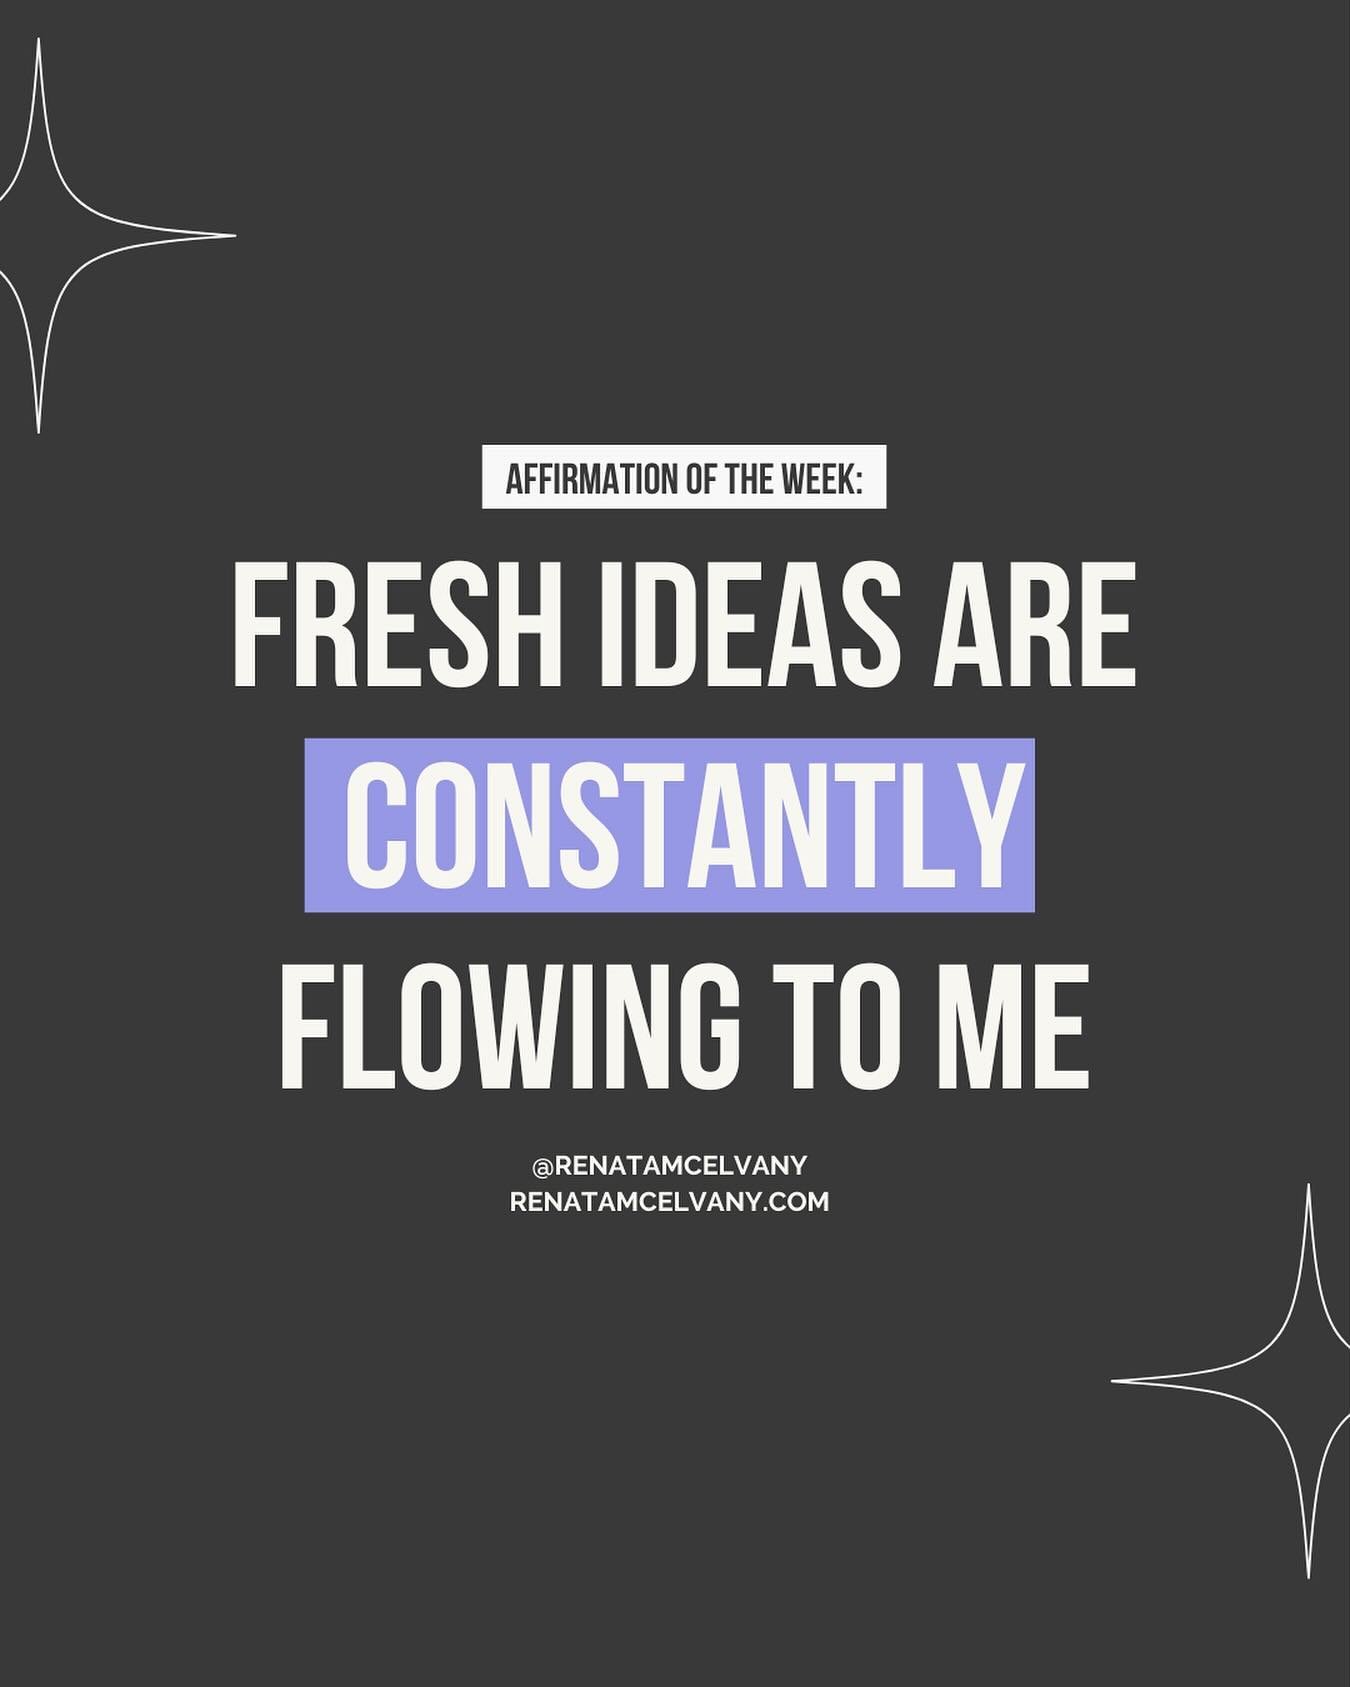 Creatives! Here is your weekly affirmation:&nbsp;

Fresh ideas are constantly flowing to me ✨
&zwnj;
Wishing you a week filled with creation 🙏🏽💜🎨

&zwnj;

#creativitycoach #creativementor&nbsp; #artistssupport #woccreatives #createthelifeyouwant 